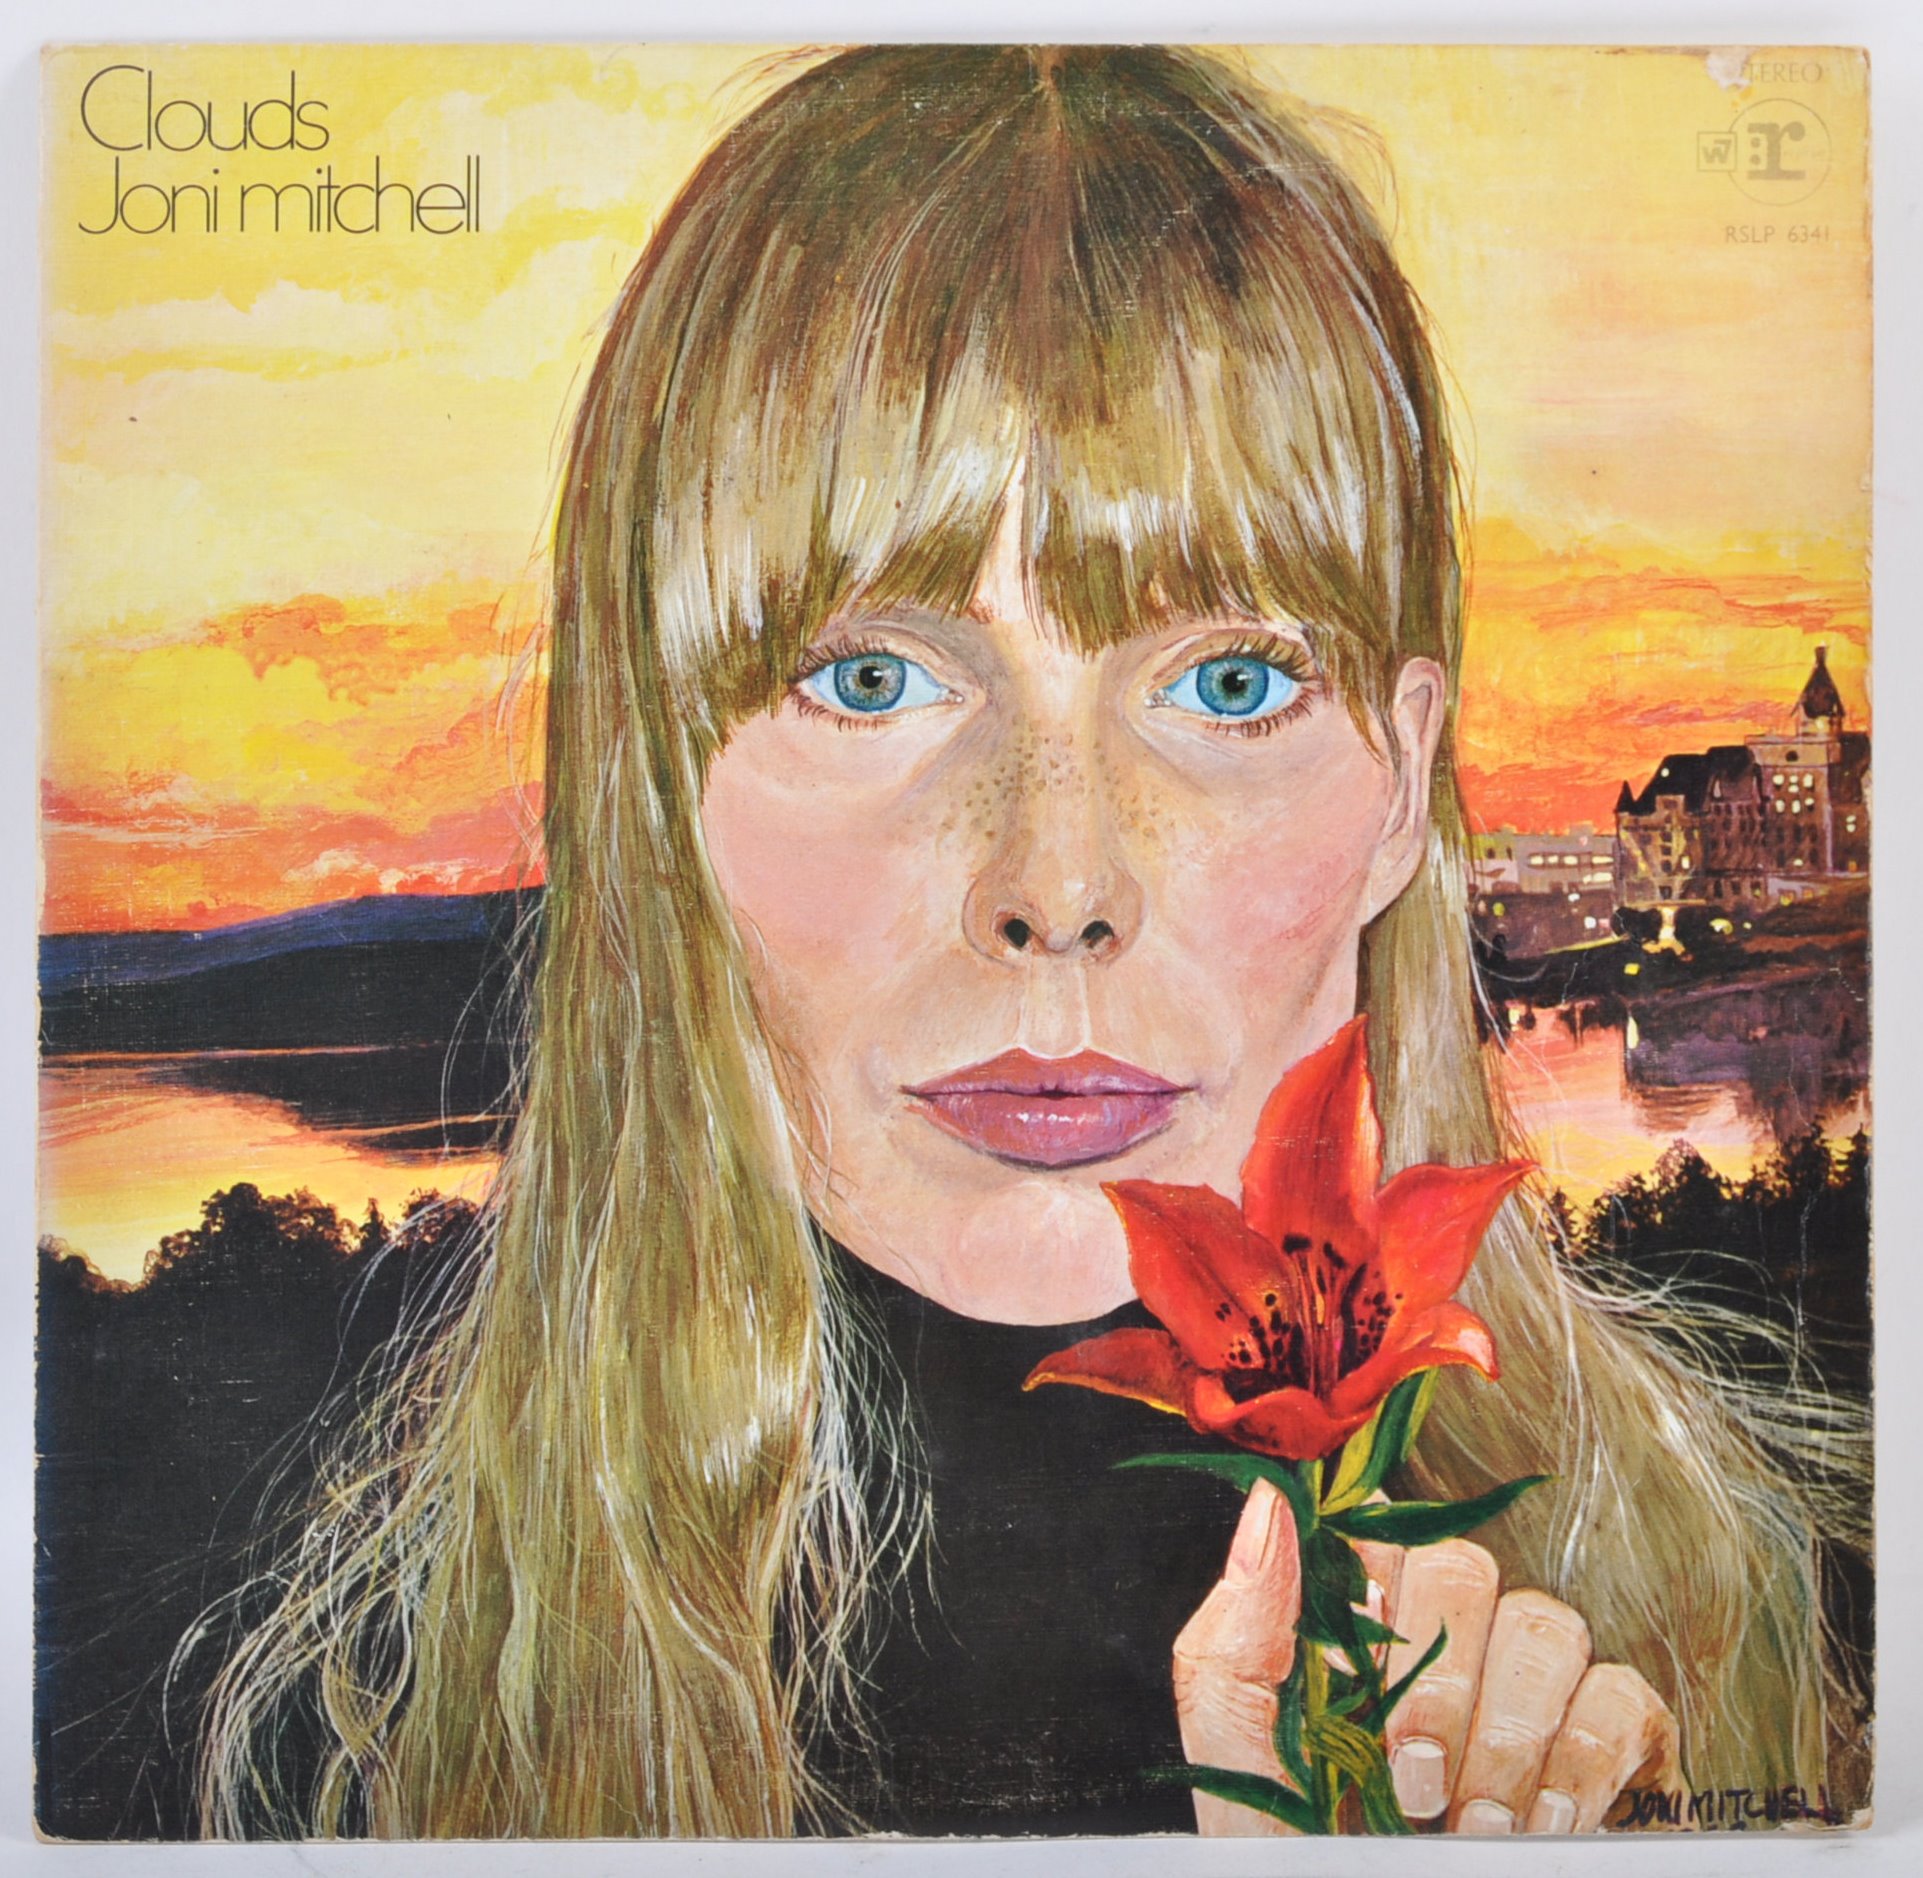 JONI MITCHELL - CLOUDS - 1969 REPRISE RECORDS RELEASE